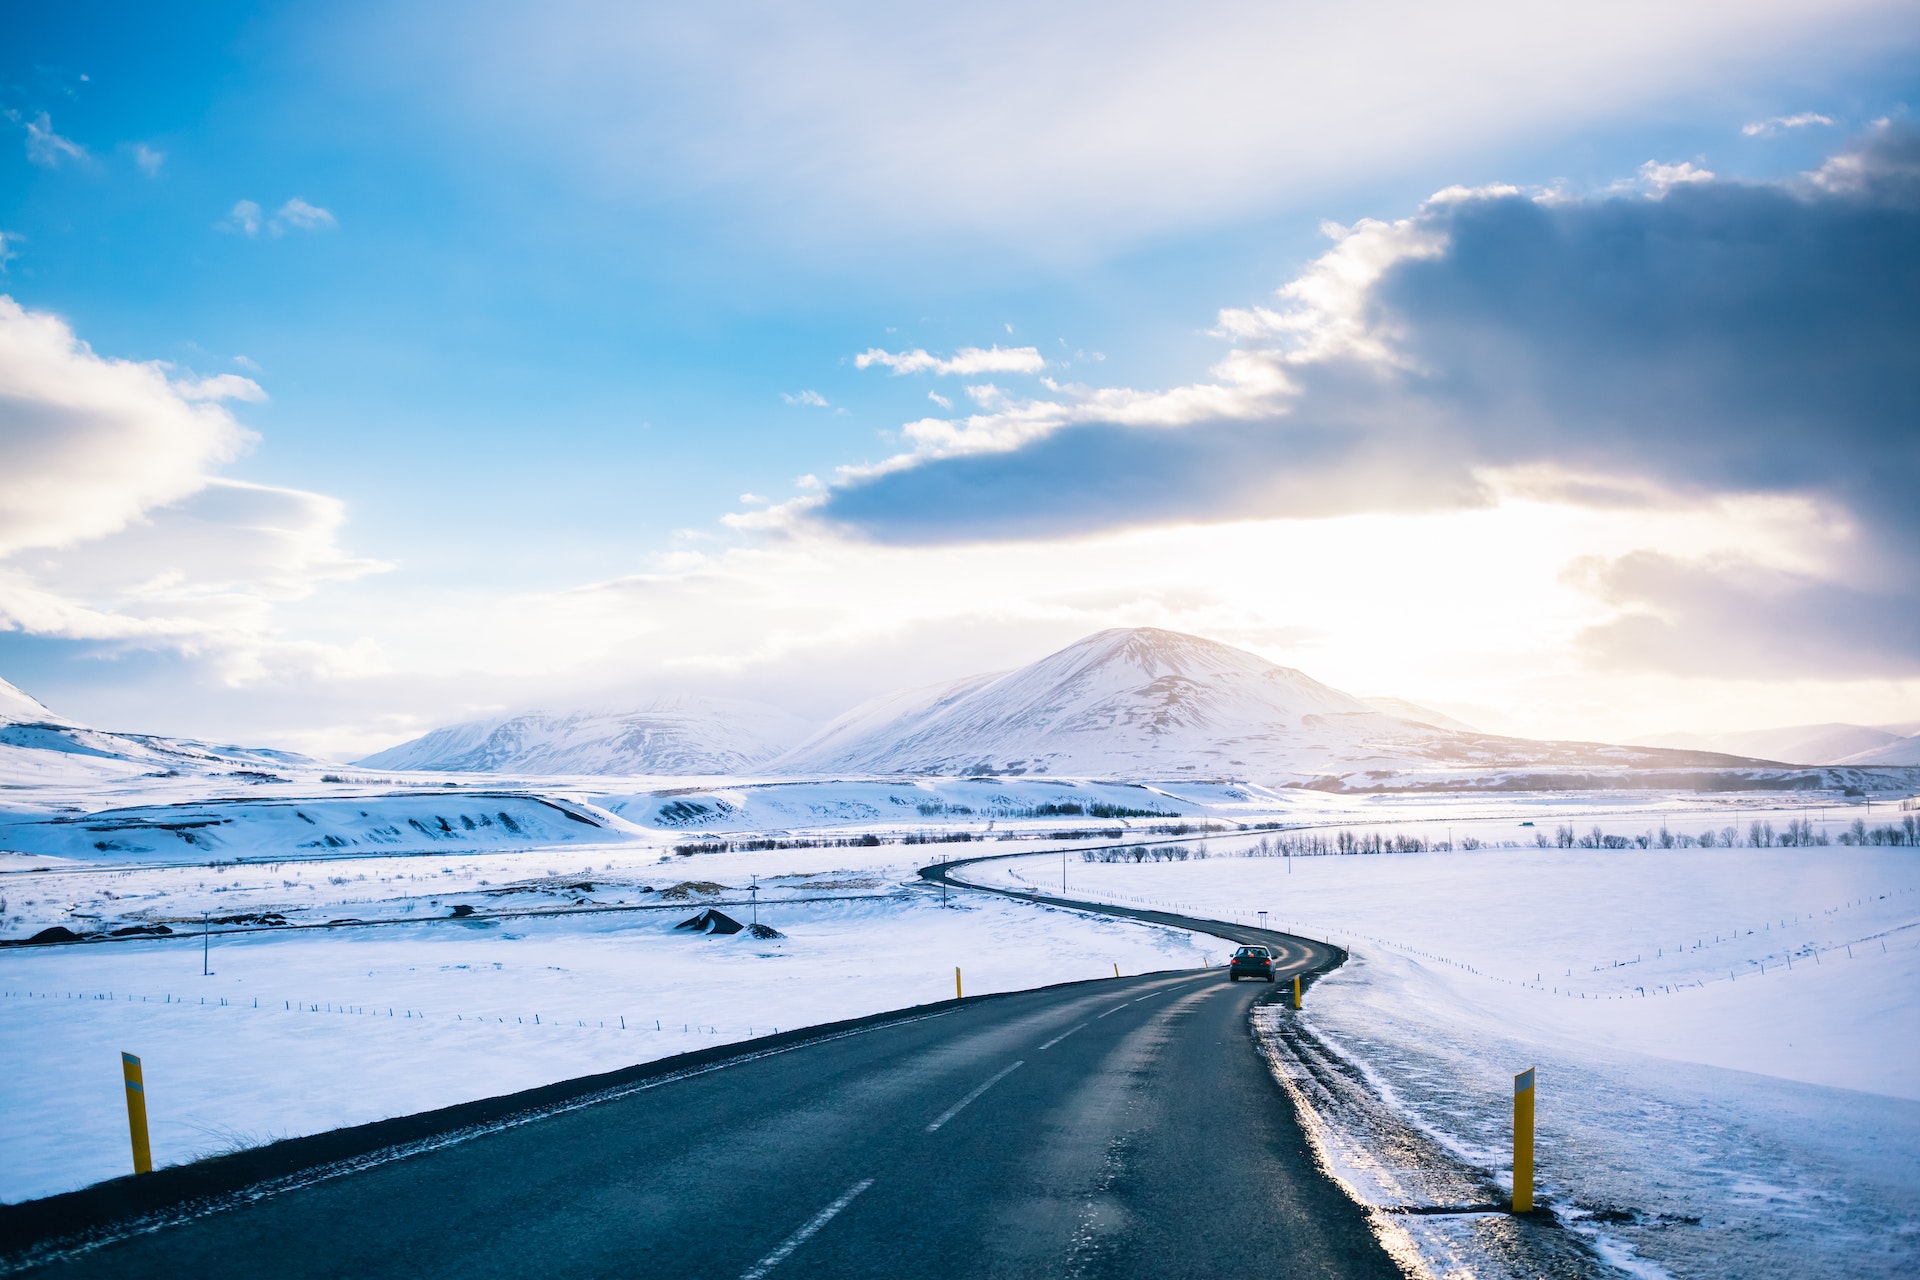 A car drives on a winter road near Akureyri, Iceland. The black road is surrounded by miles of snowy terrain. Mountains are visible in the distance.